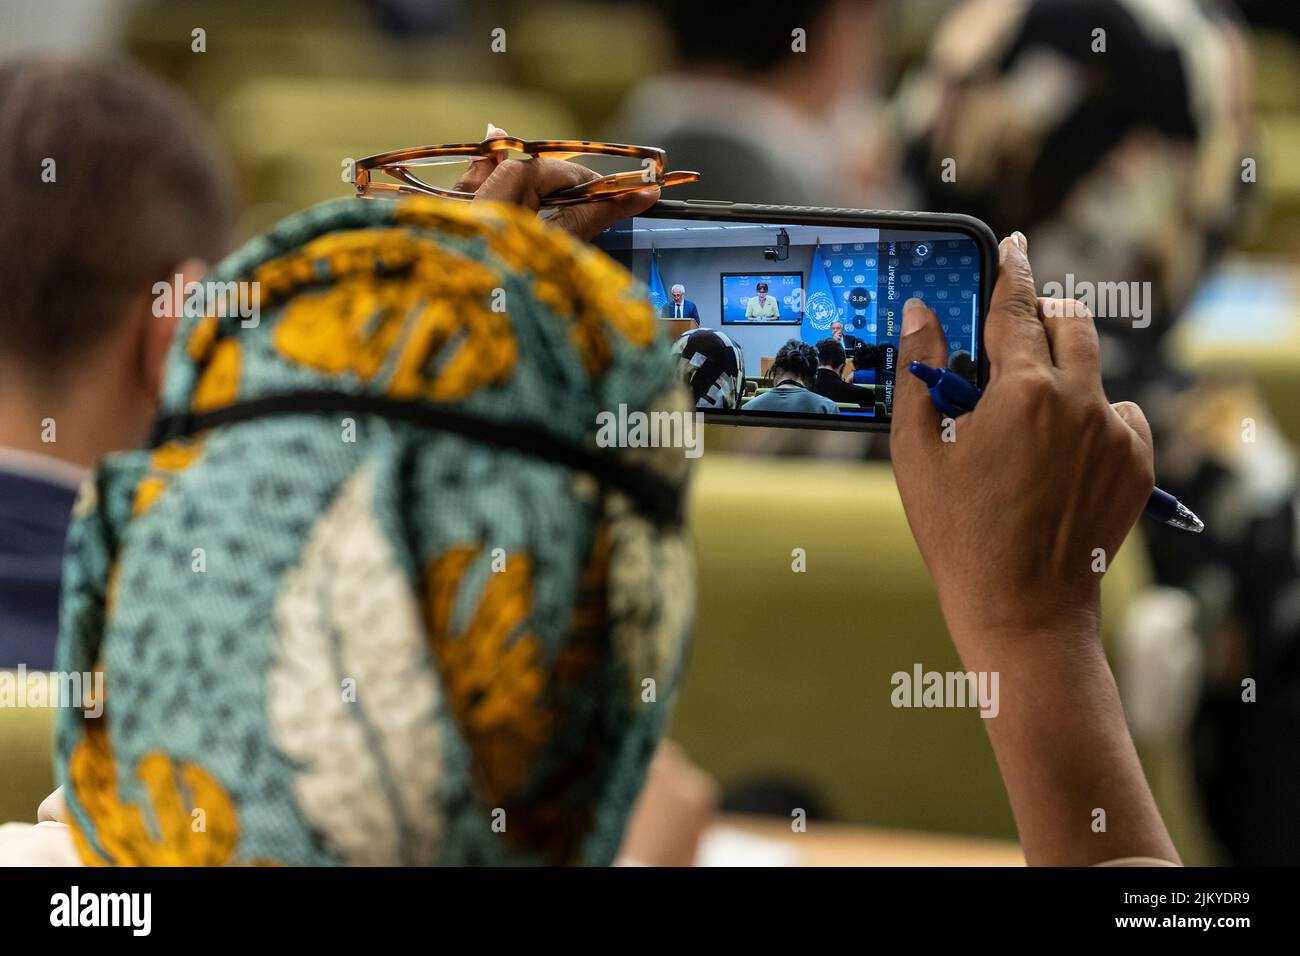 New York, New York, USA. 3rd Aug, 2022. Deputy Secretary-General Amina Mohammed takes photo of Secretary-General Antonio Guterres press briefing on launch of the 3rd brief by the GCRG on Food, Energy and Finance at UN Headquarters. Report by Global Crisis Response Group and Rebeca Grynspan who joined virtually from Geneva highlighted global insecurity on shortage of food, energy and finance after COVID-19 pandemic and exacerbated by war Russia is waging on Ukraine. Secretary-General and Ms. Grynspan urged all countries to conserve energy, invest more into renewable energy sources, t Stock Photo